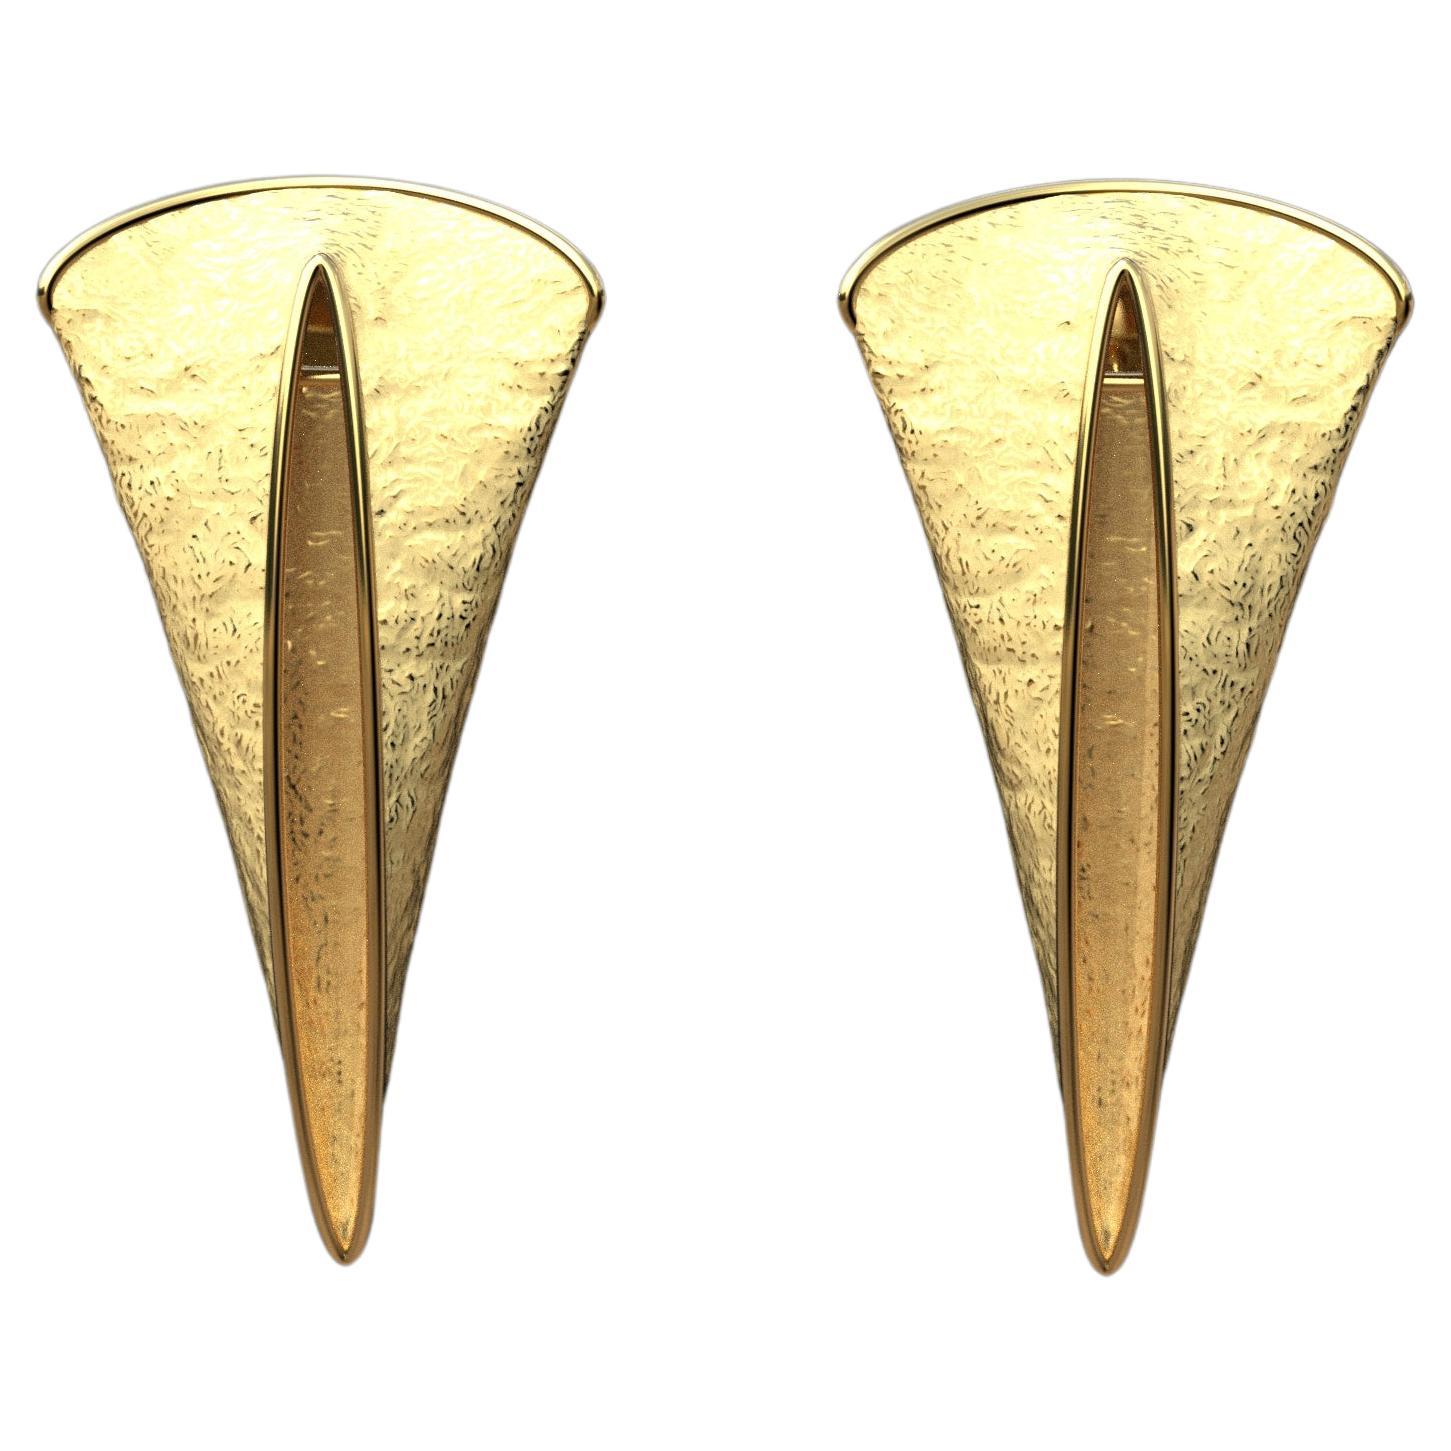 Bold 14k Gold Earrings Handmade in Italy by Oltremare Gioielli, Thorn Shaped. For Sale